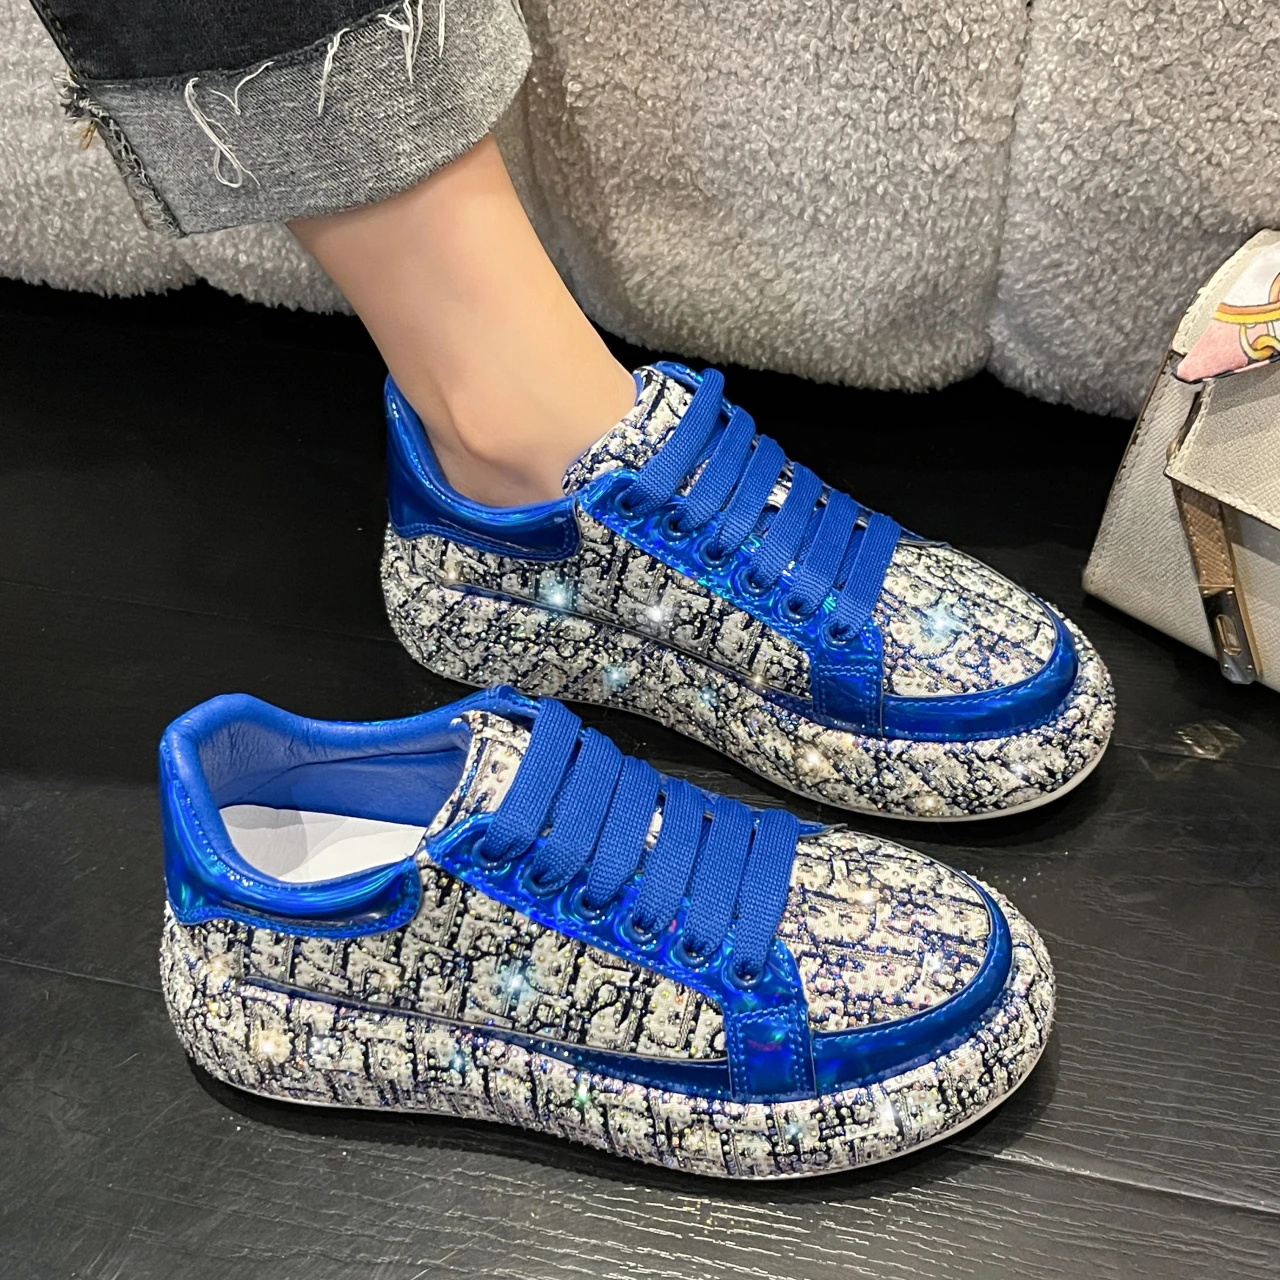 

MODX Fashion Sneakers Casual Flat Shoes High Quality Luxury Rhinestone Decorated Leather Upper Heightening Platform Womens Shoes